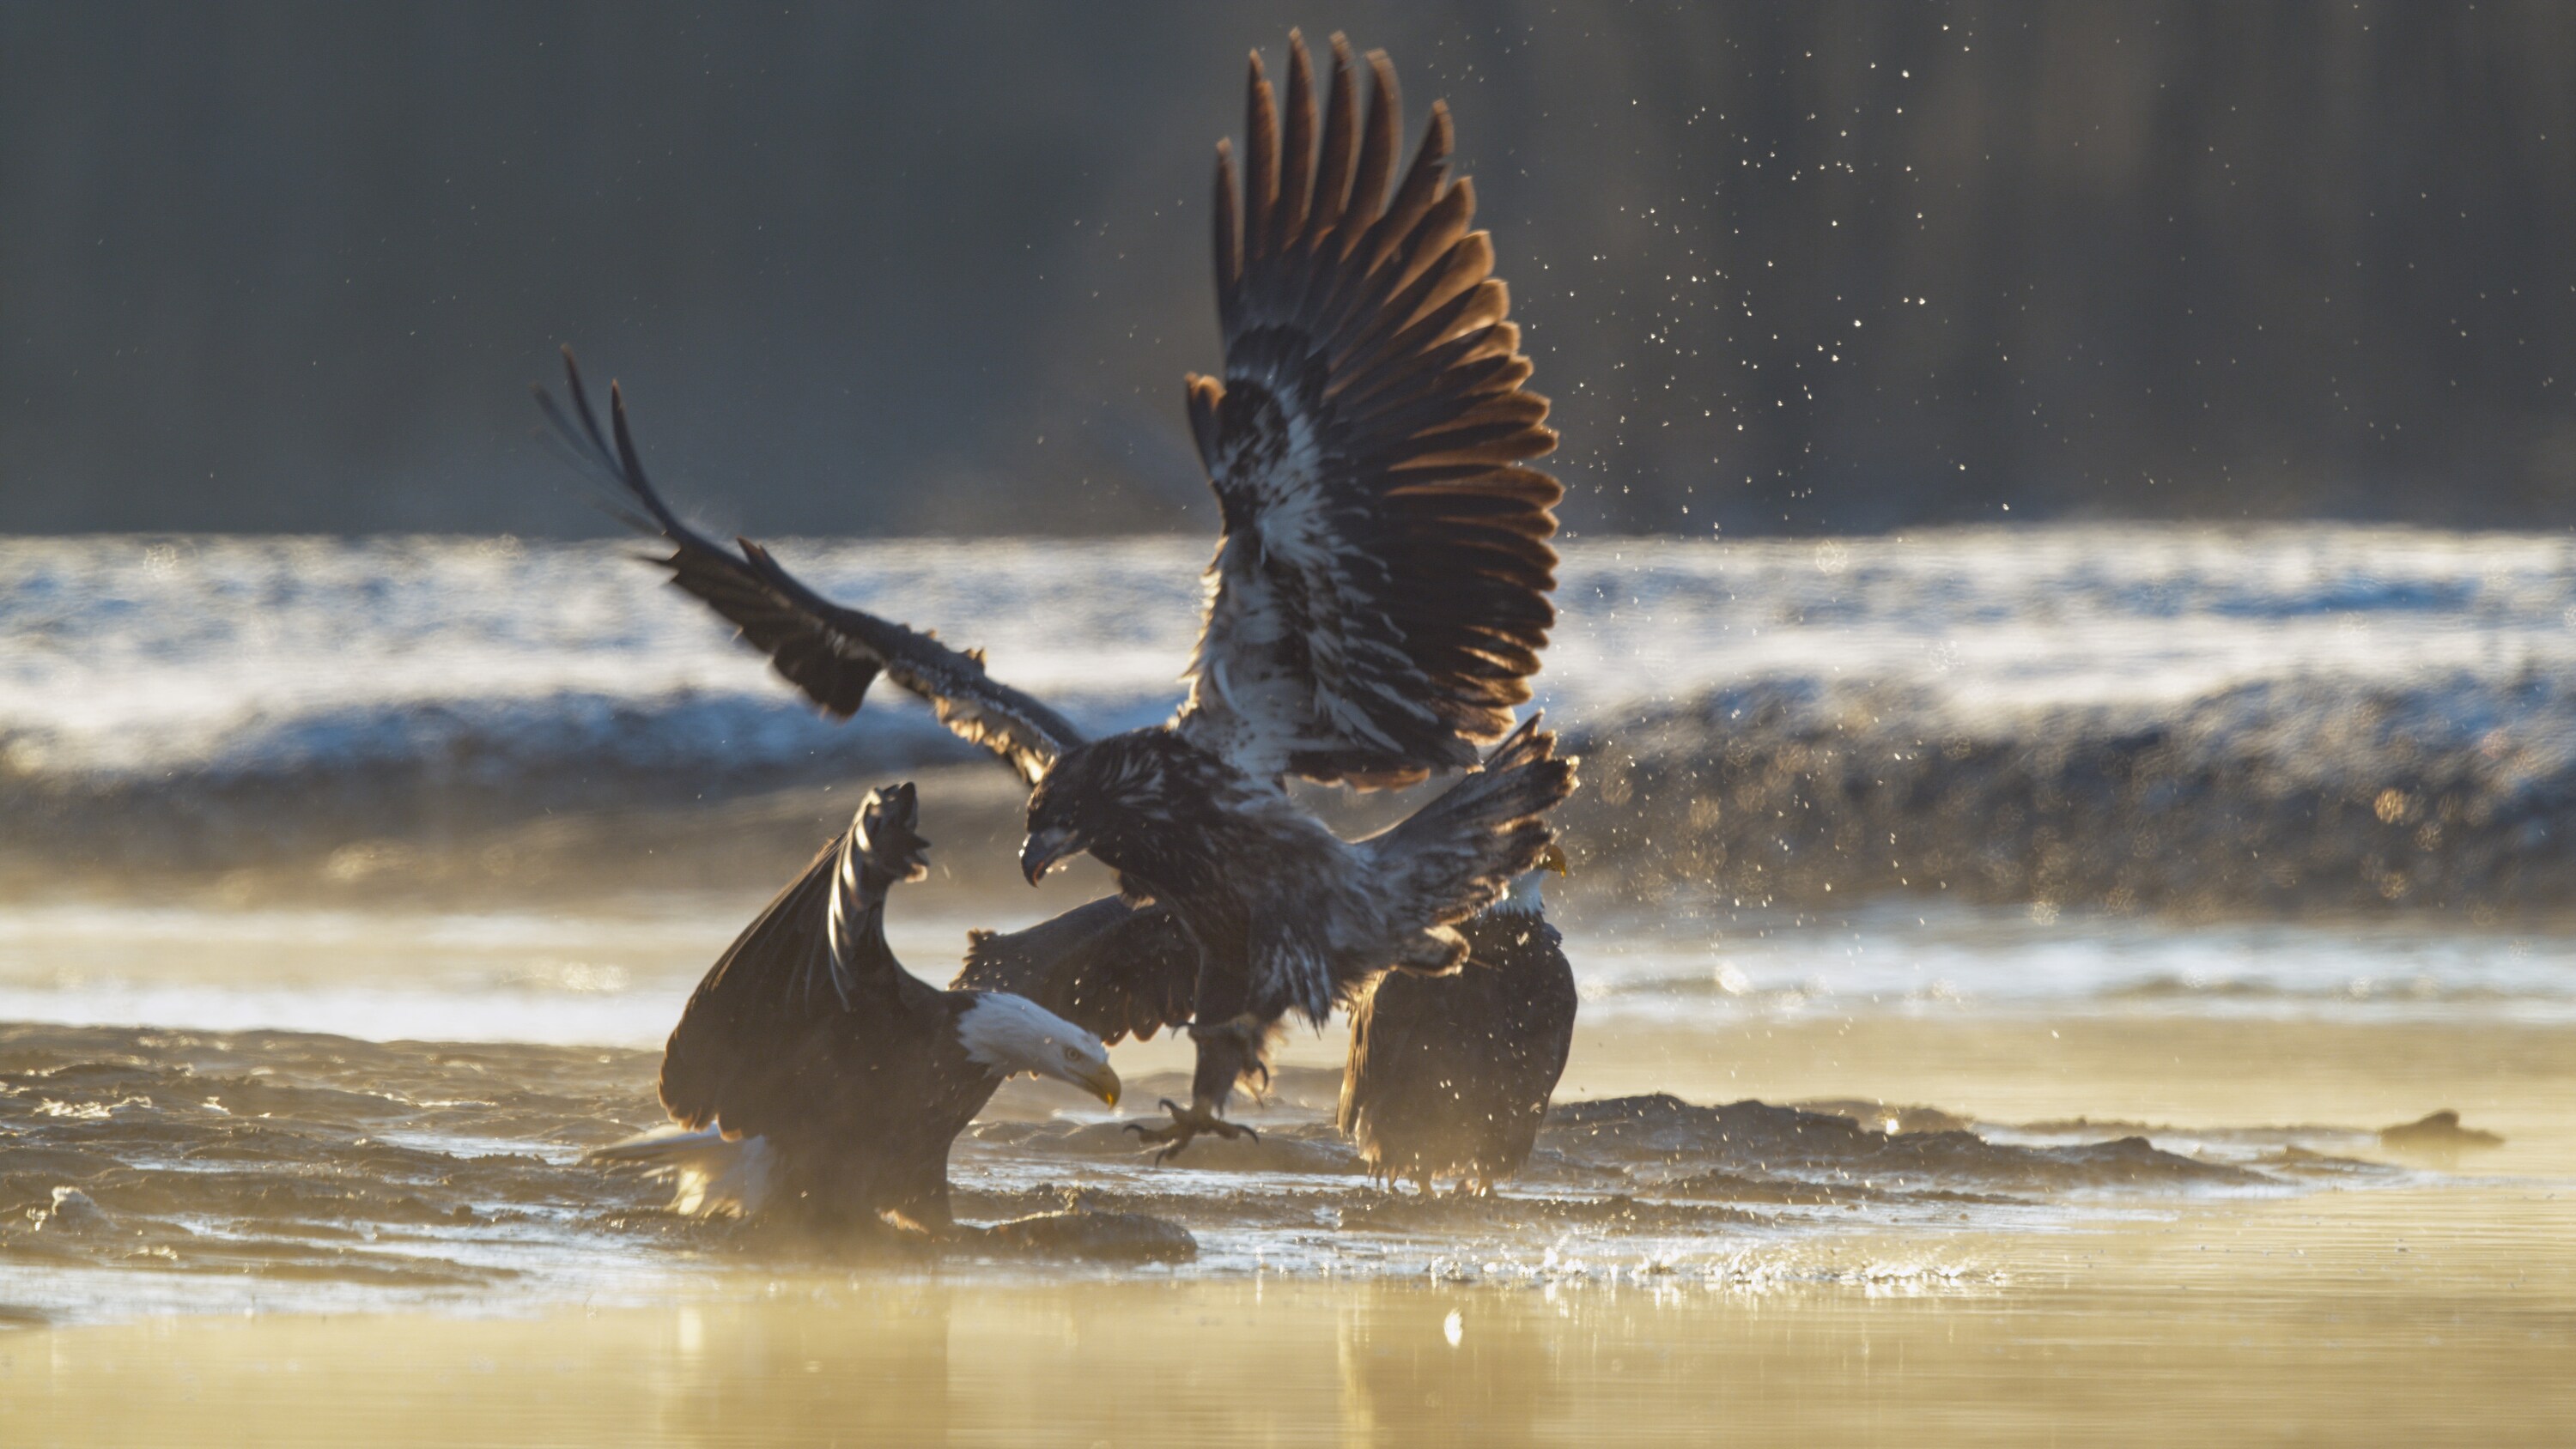 A juvenile bald eagle fights adults for food along the banks of the Chilkat River. (National Geographic for Disney+)